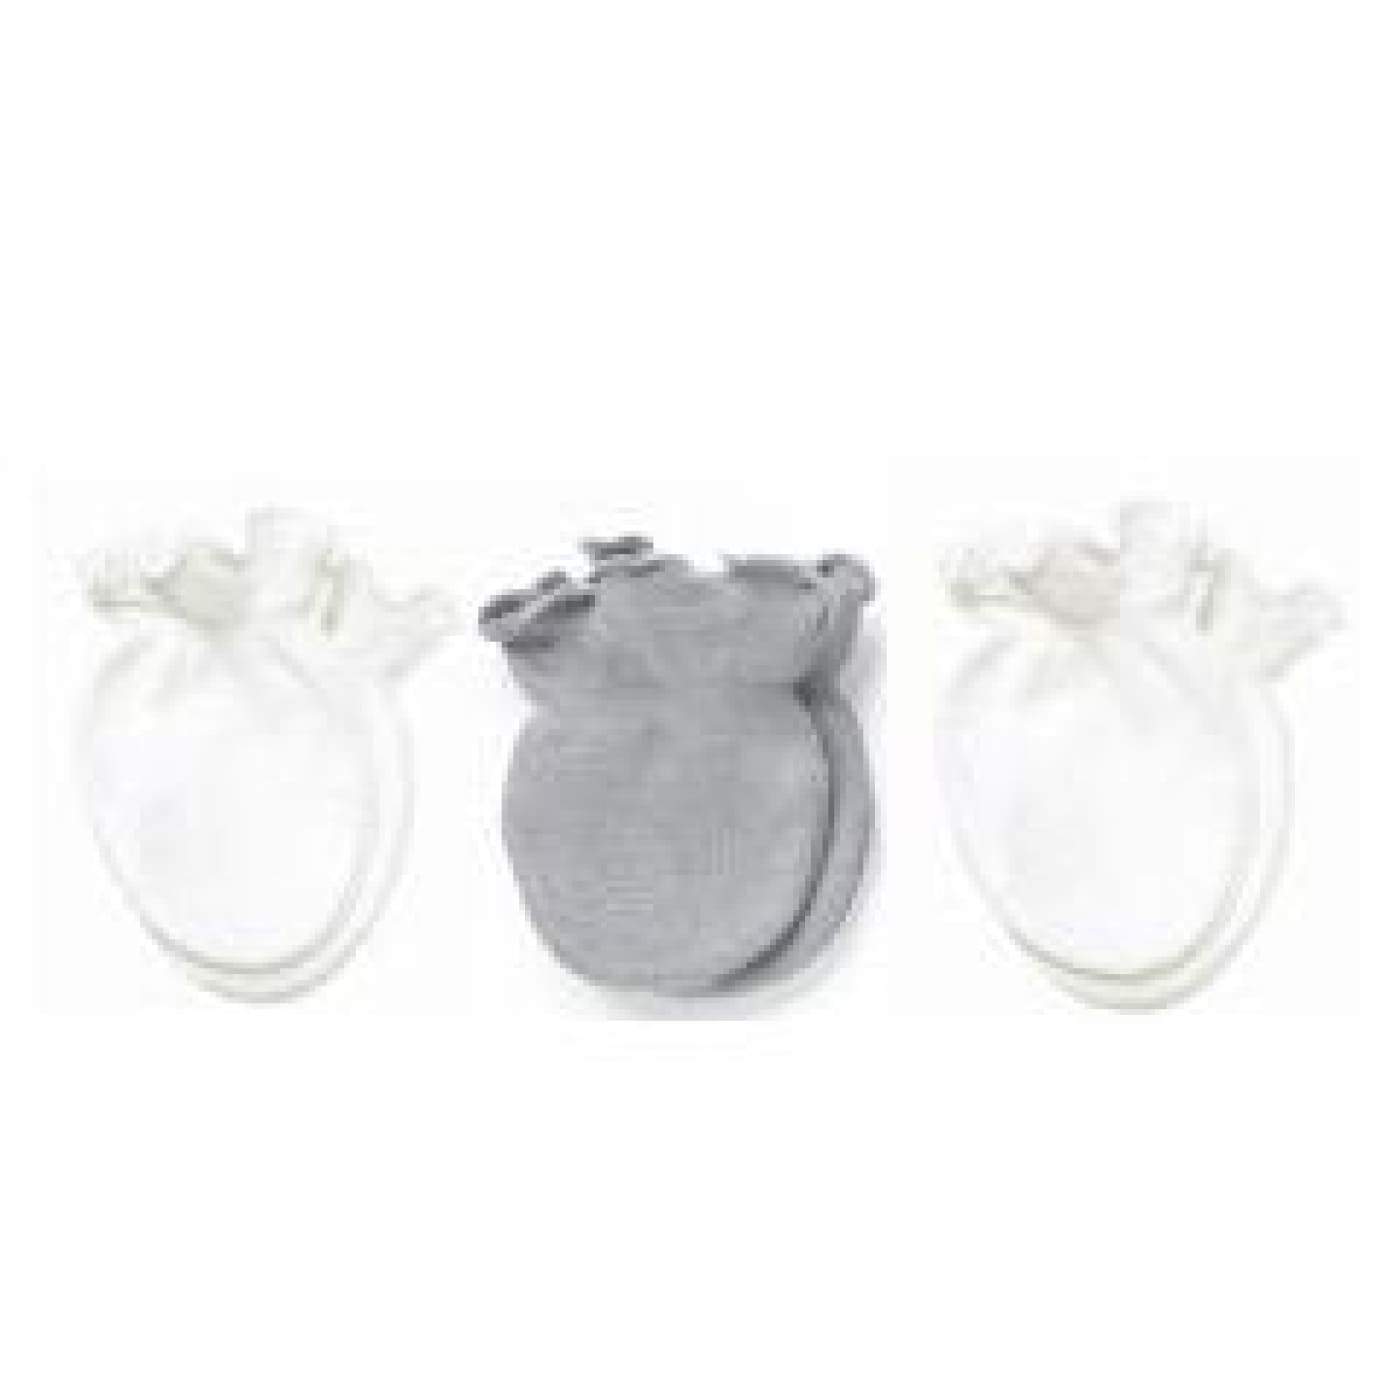 Playette Preemie Mittens - Grey/White 3PK - BABY & TODDLER CLOTHING - MITTENS/SOCKS/SHOES